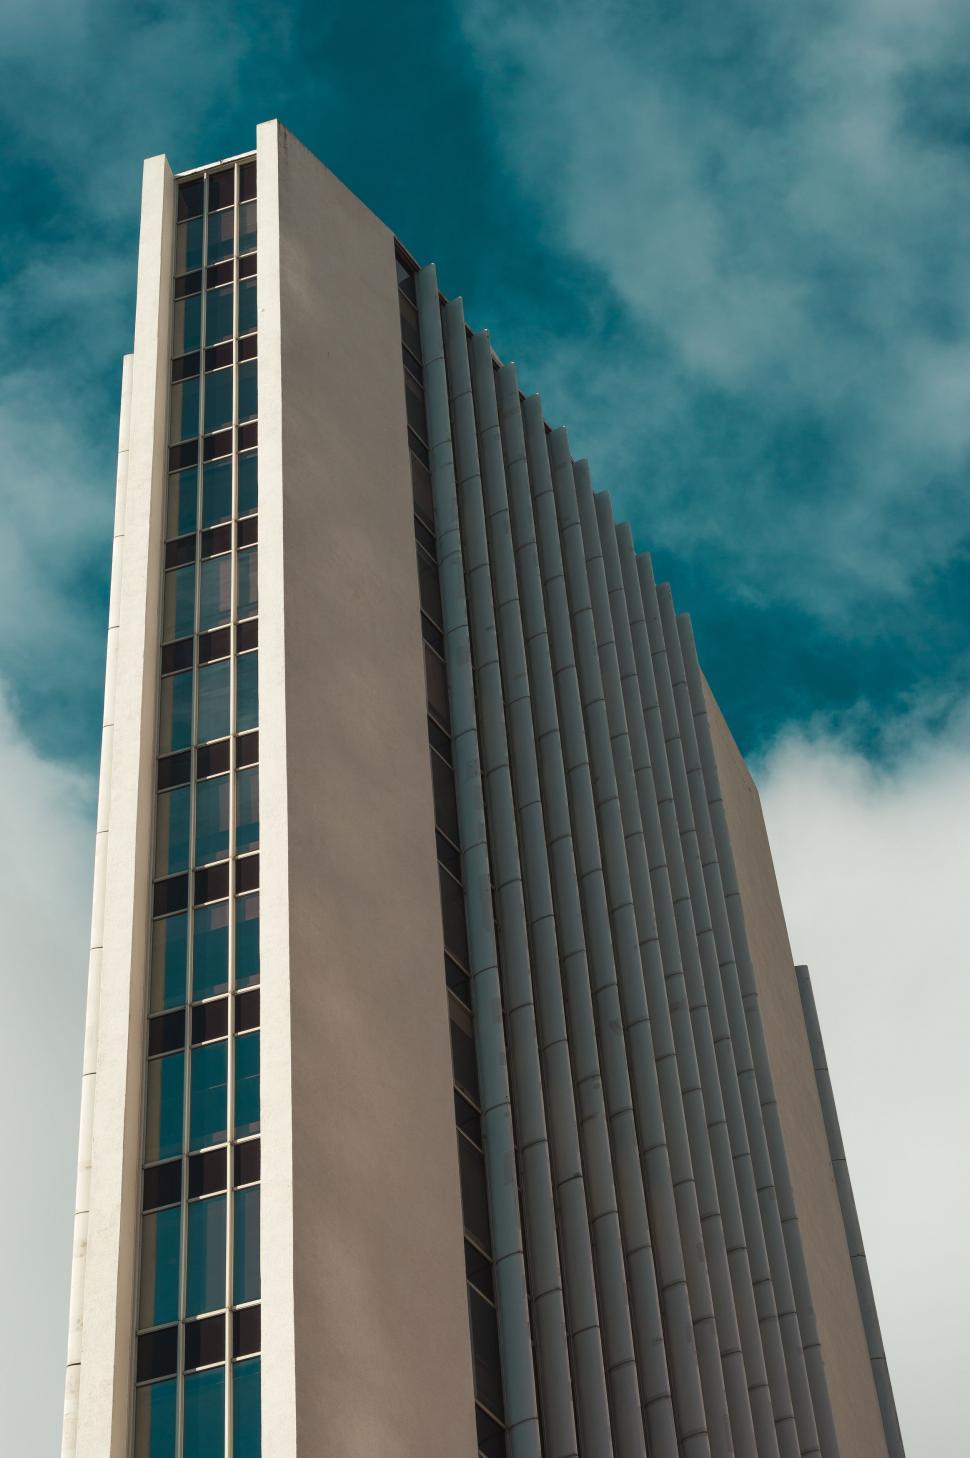 Free Image of High-rise building 